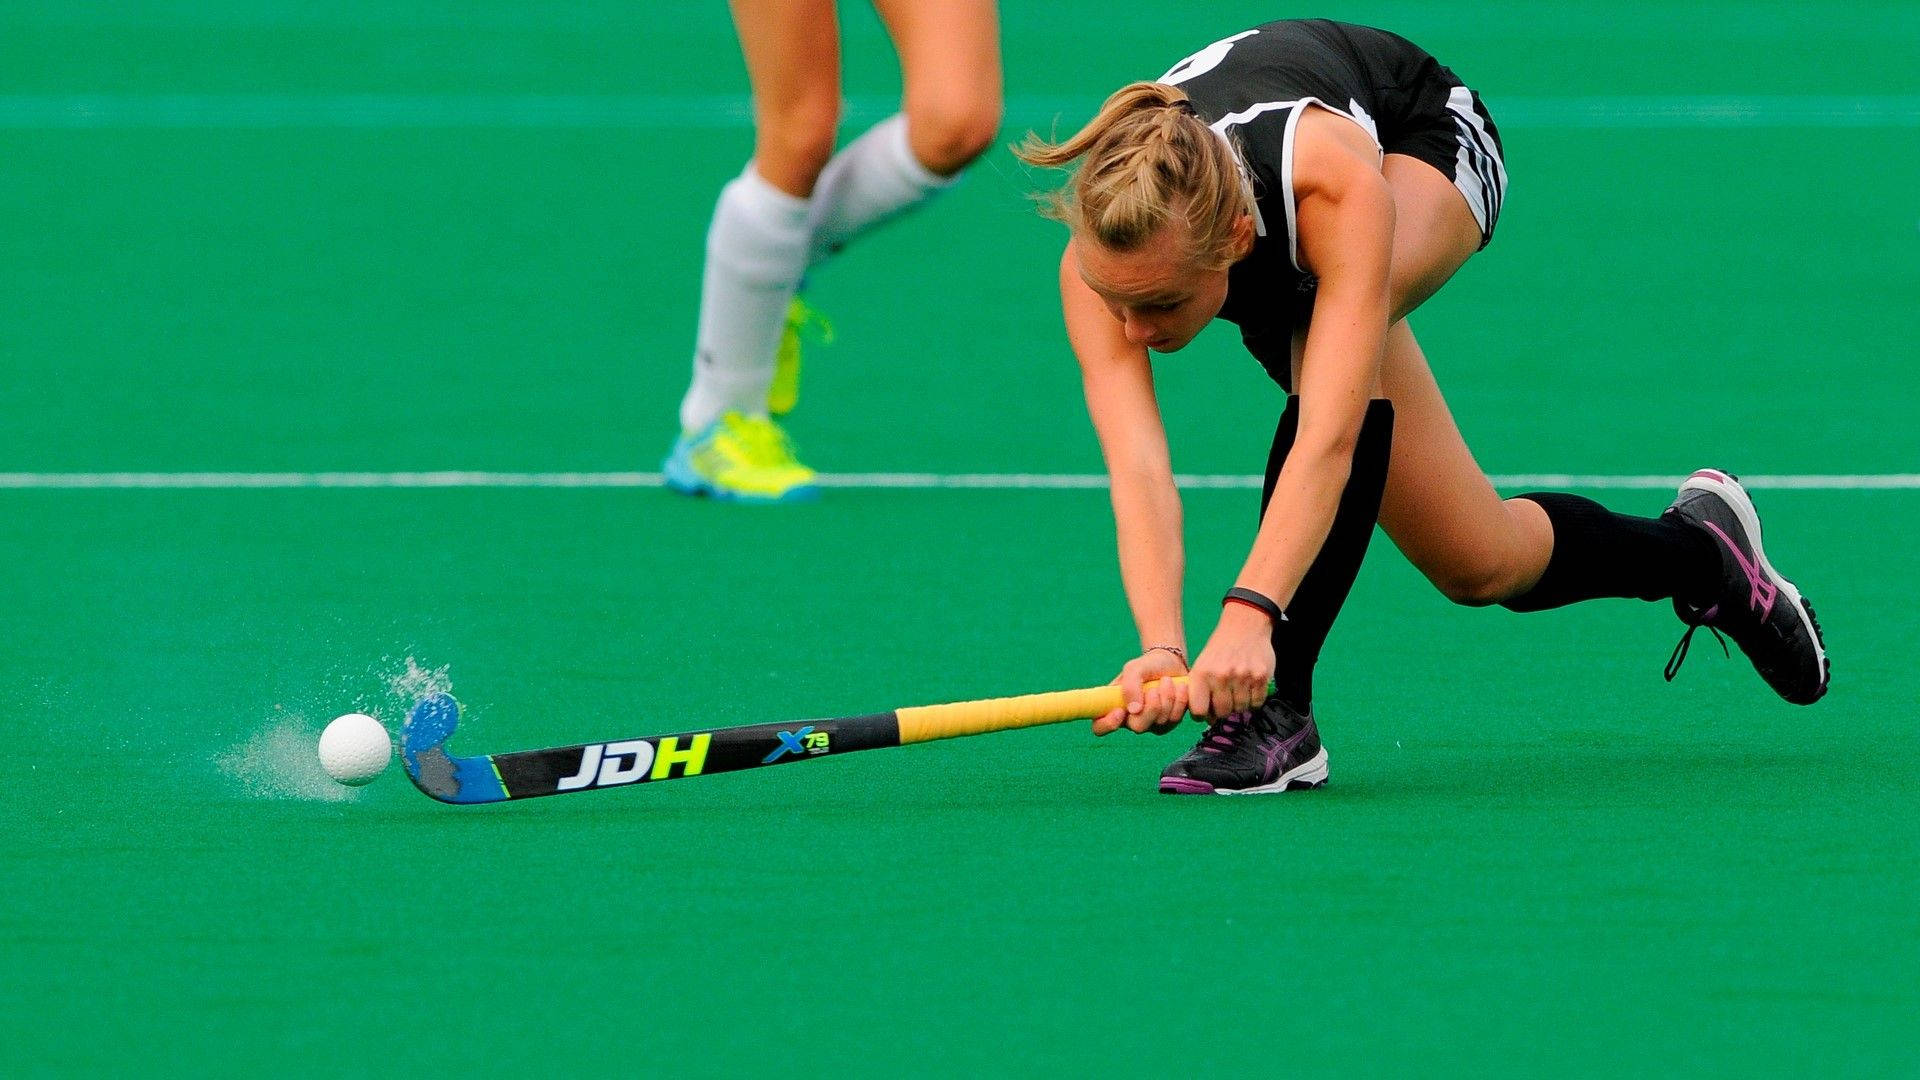 Dynamic Female Field Hockey Player In Action Background